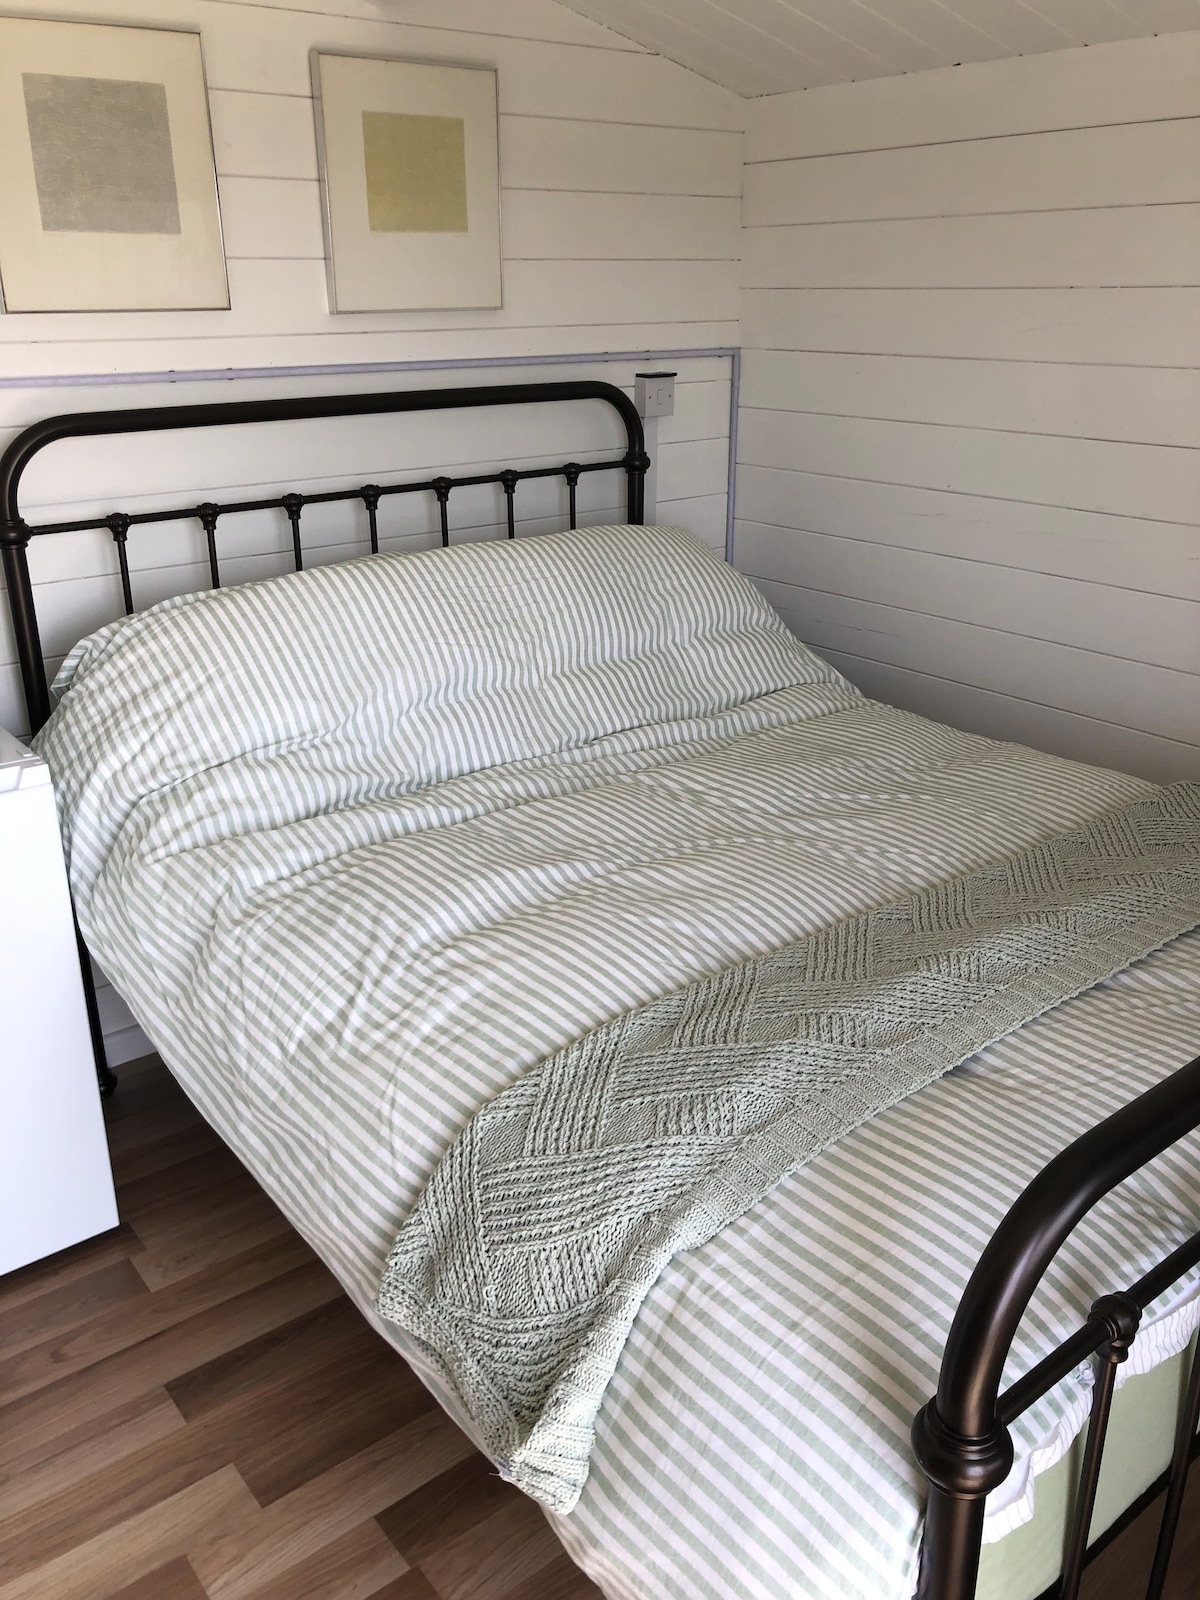 Bed in a posh shed